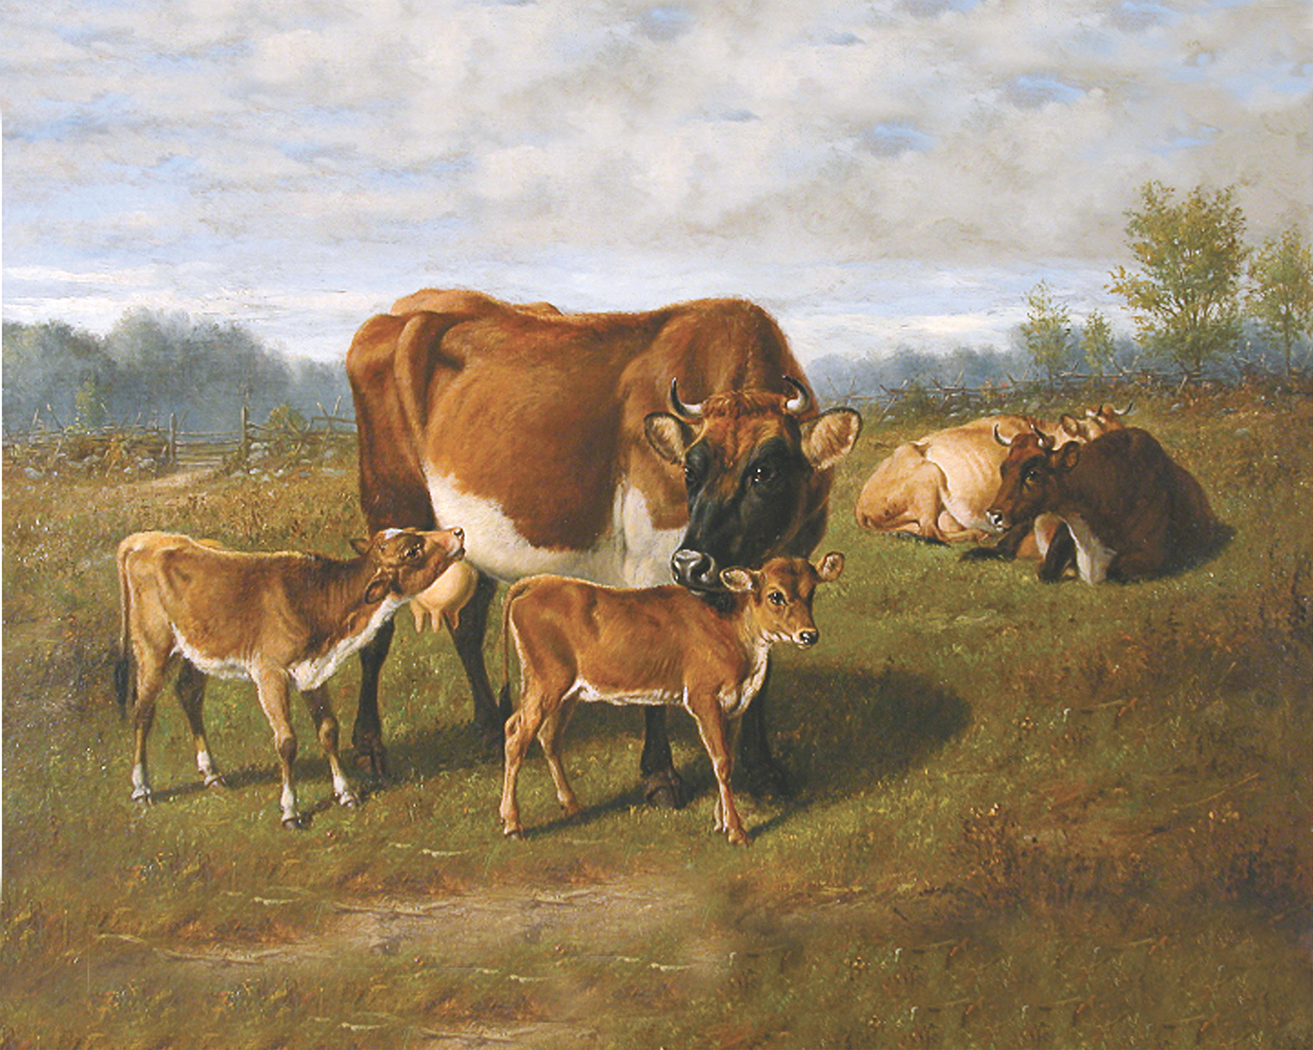 Farm/Pastoral Animals Cows with Calves Framed Oil Painting R ...